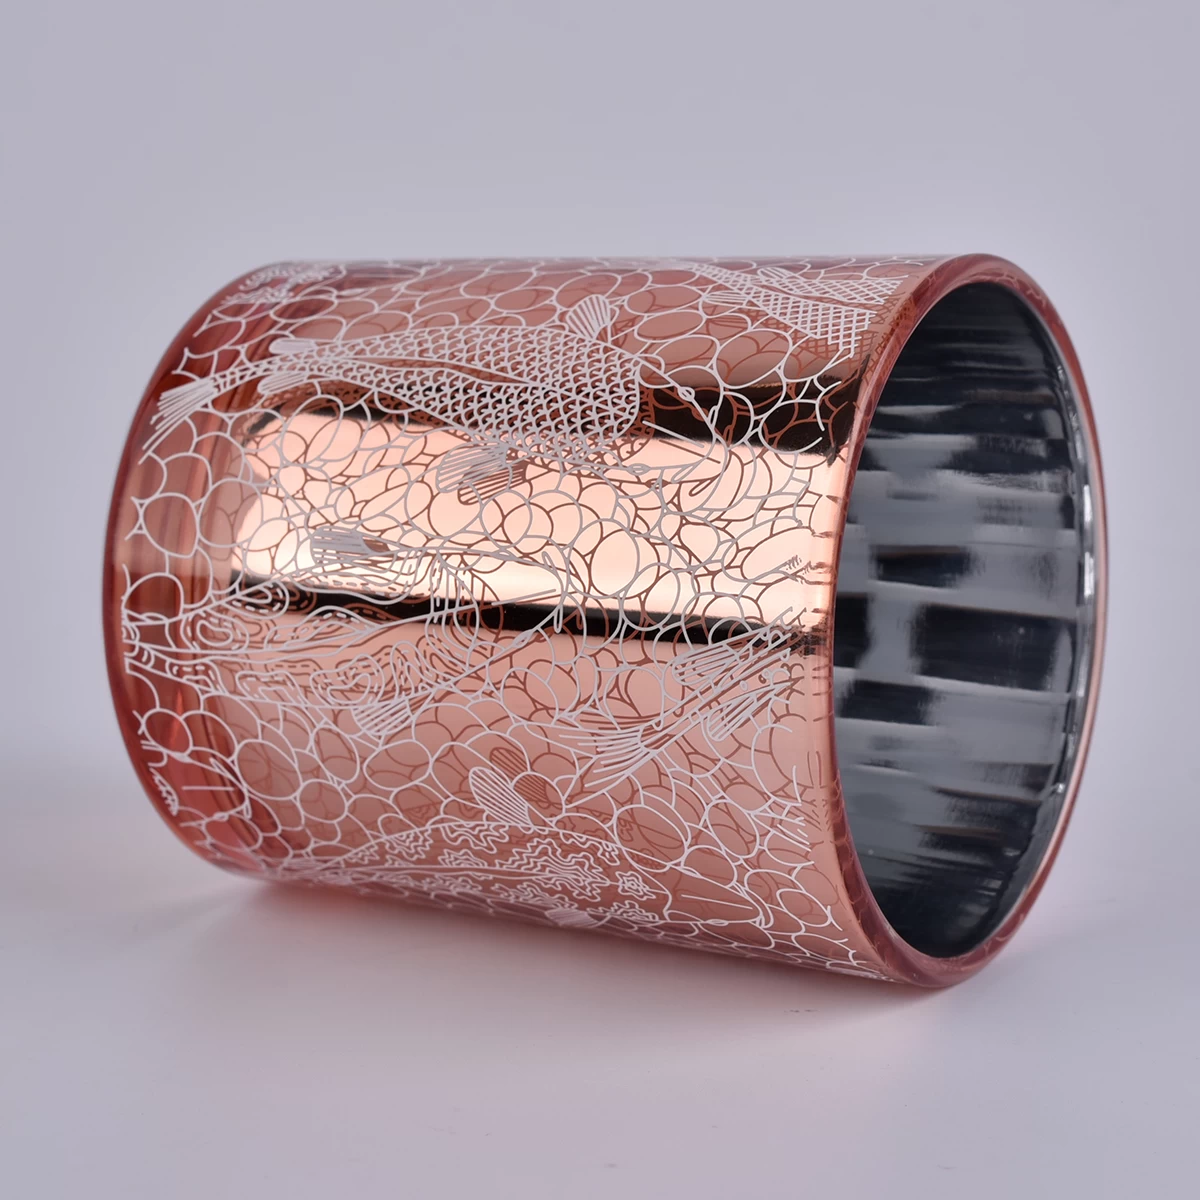 rose gold glass candle jar with 3D pattern prints